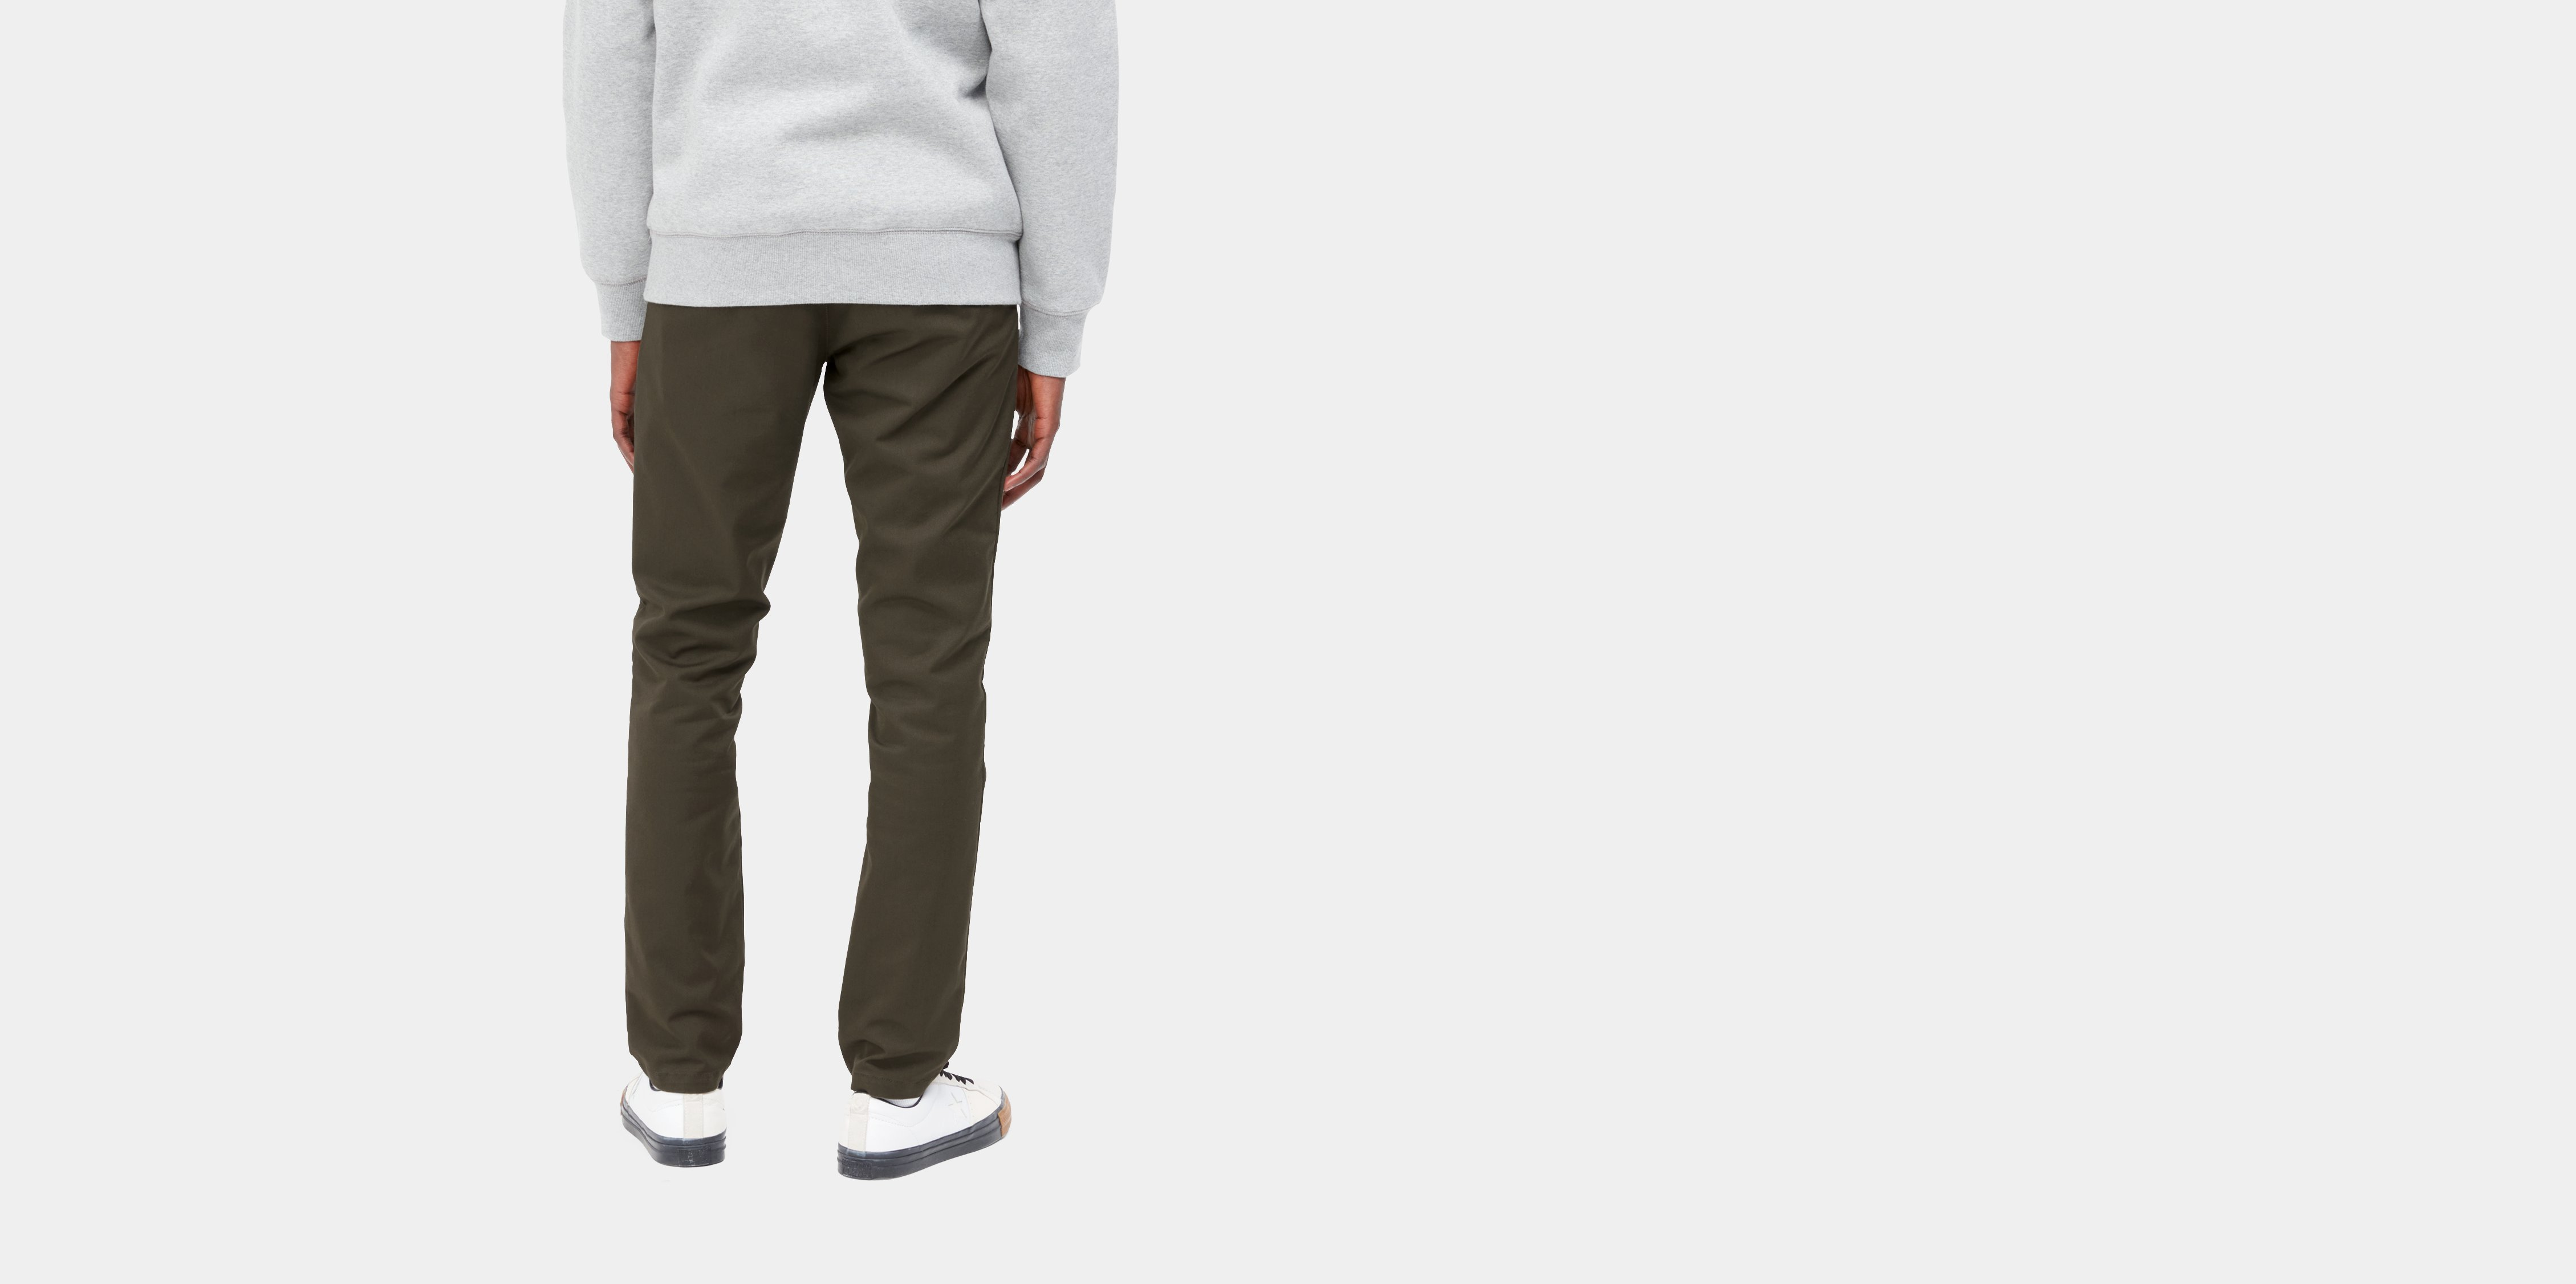 Carhartt WIP Sid Pant, Cypress | Official Online Store